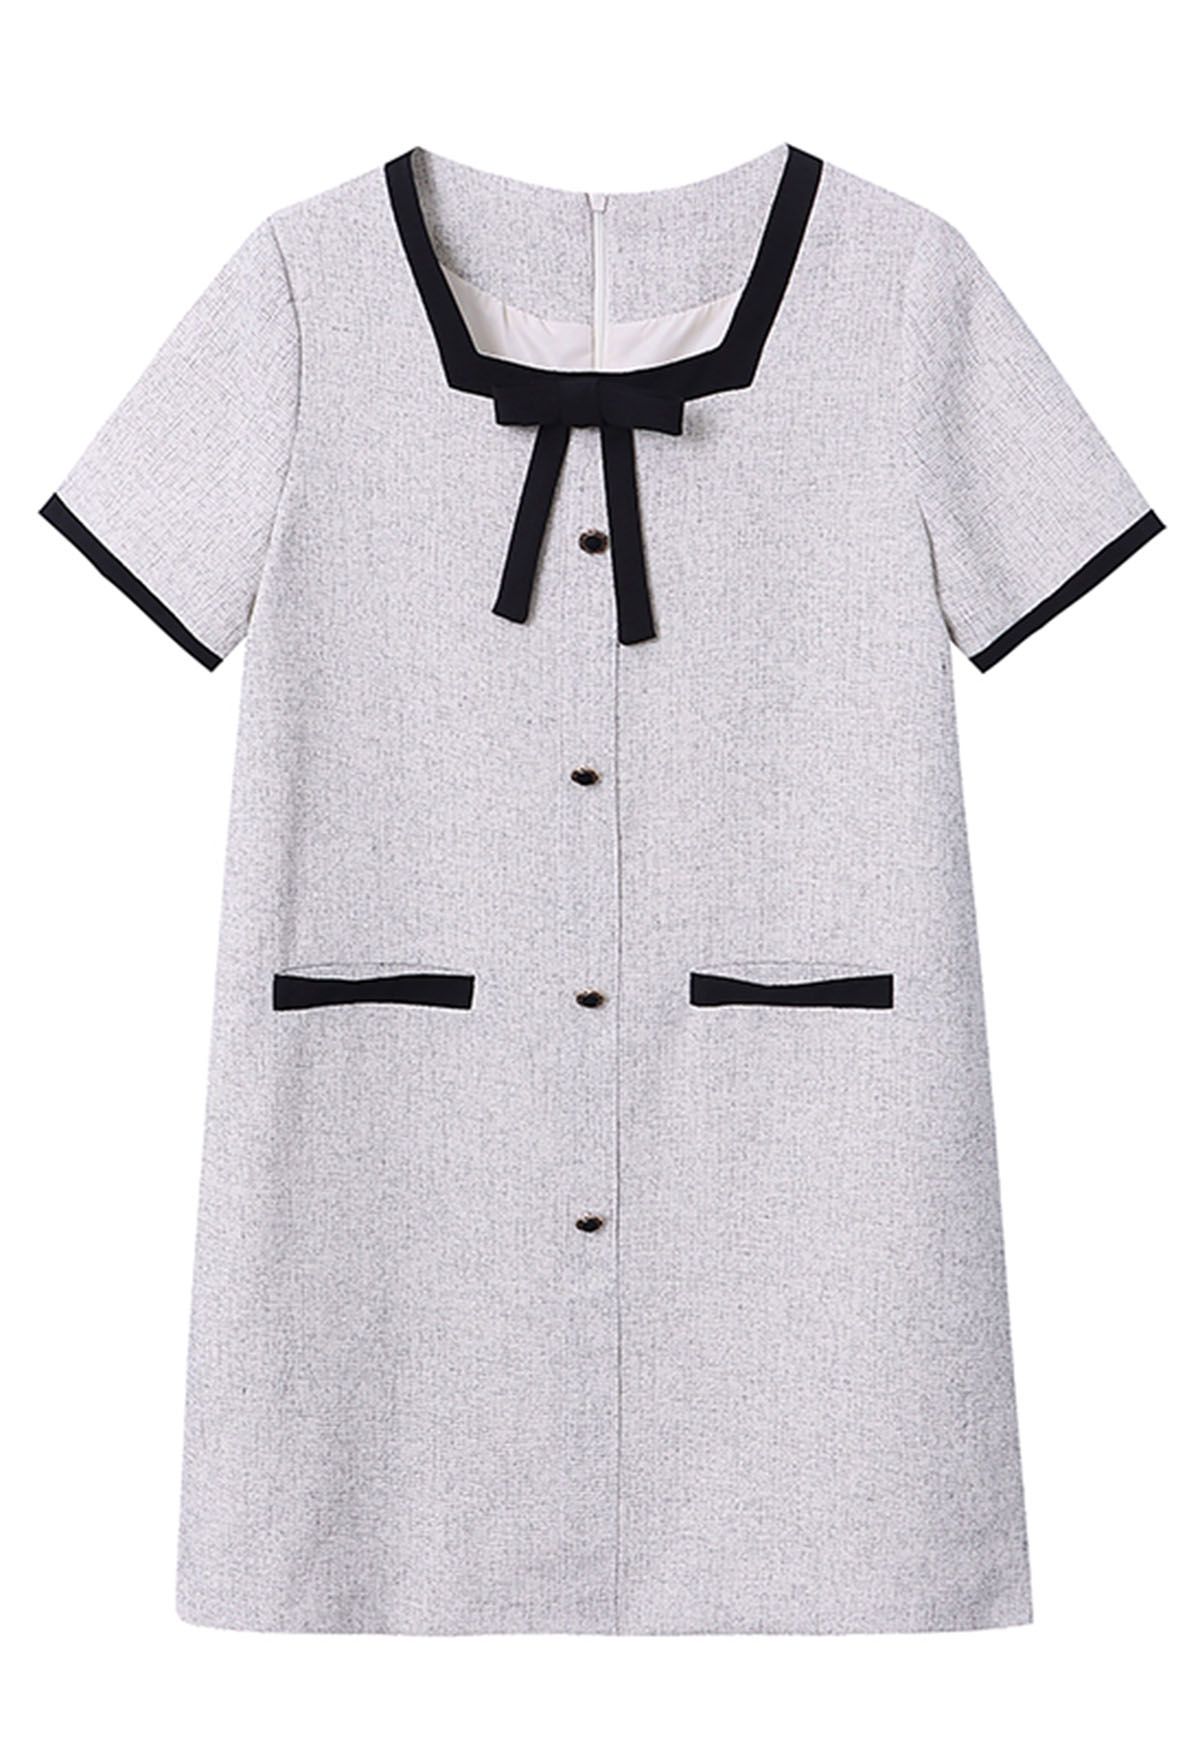 Bowknot Decorated Contrast Edge Shift Dress